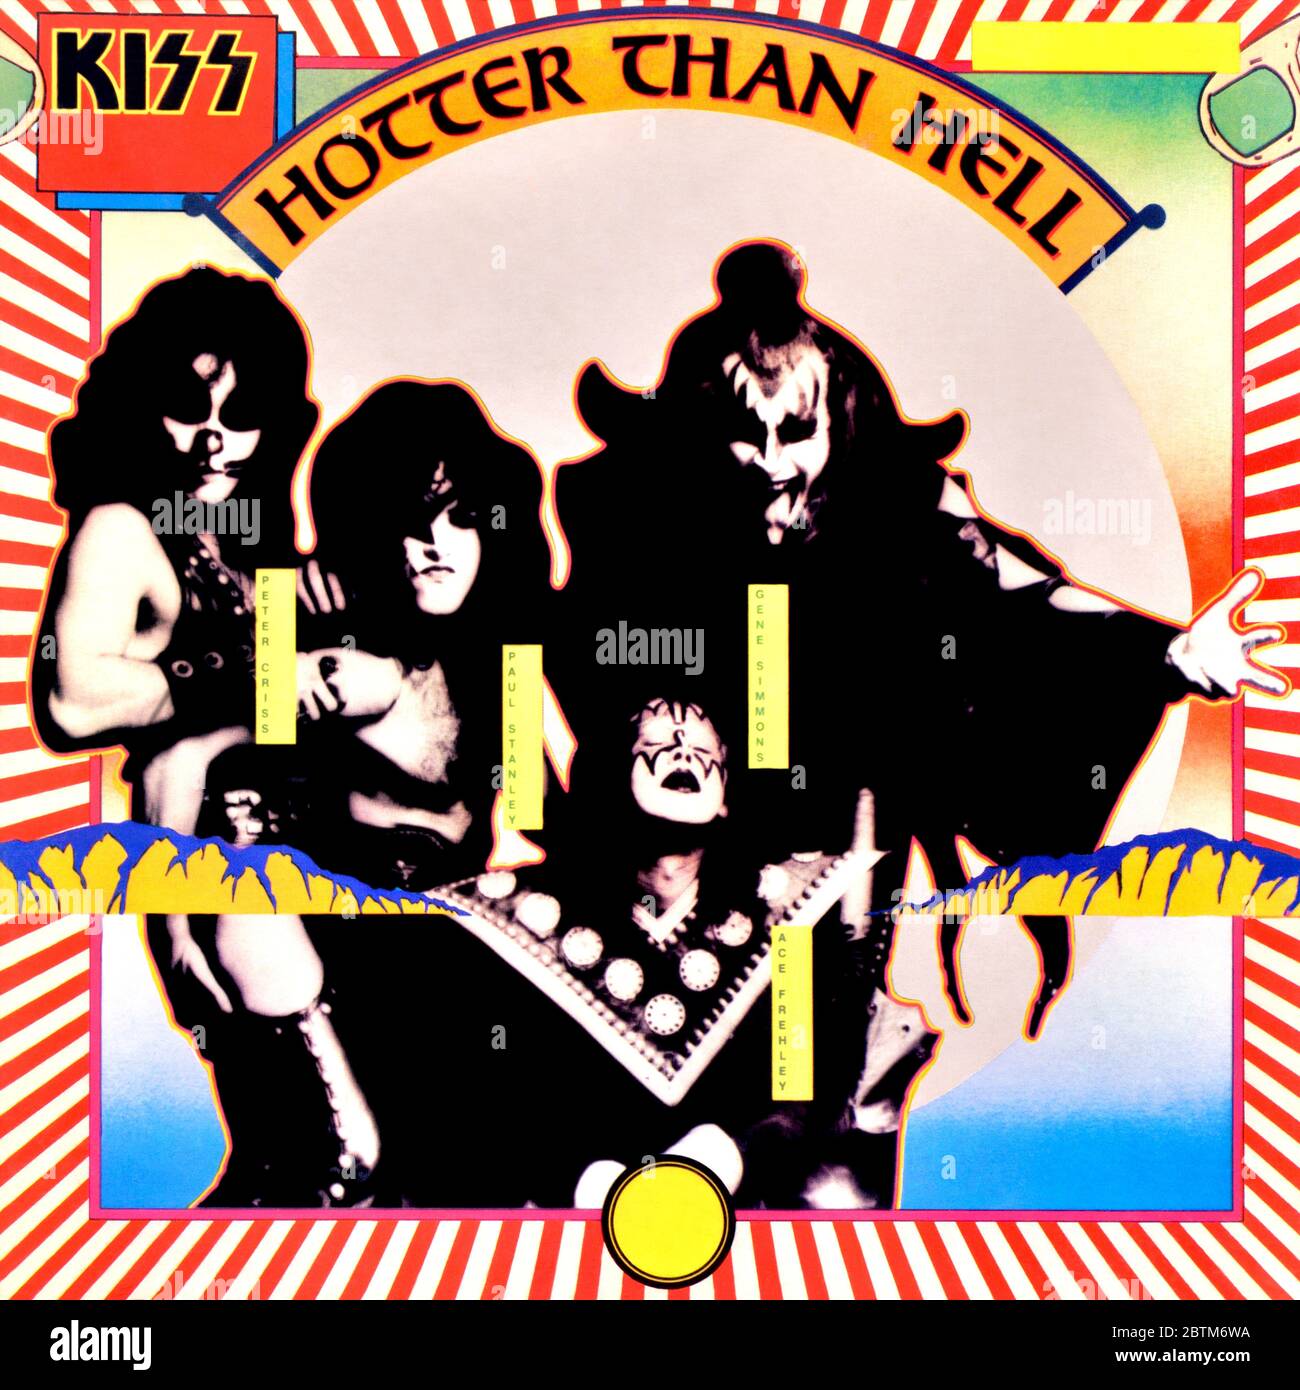 Kiss - copertina originale in vinile - hotter than Hell - 1974 Foto stock -  Alamy